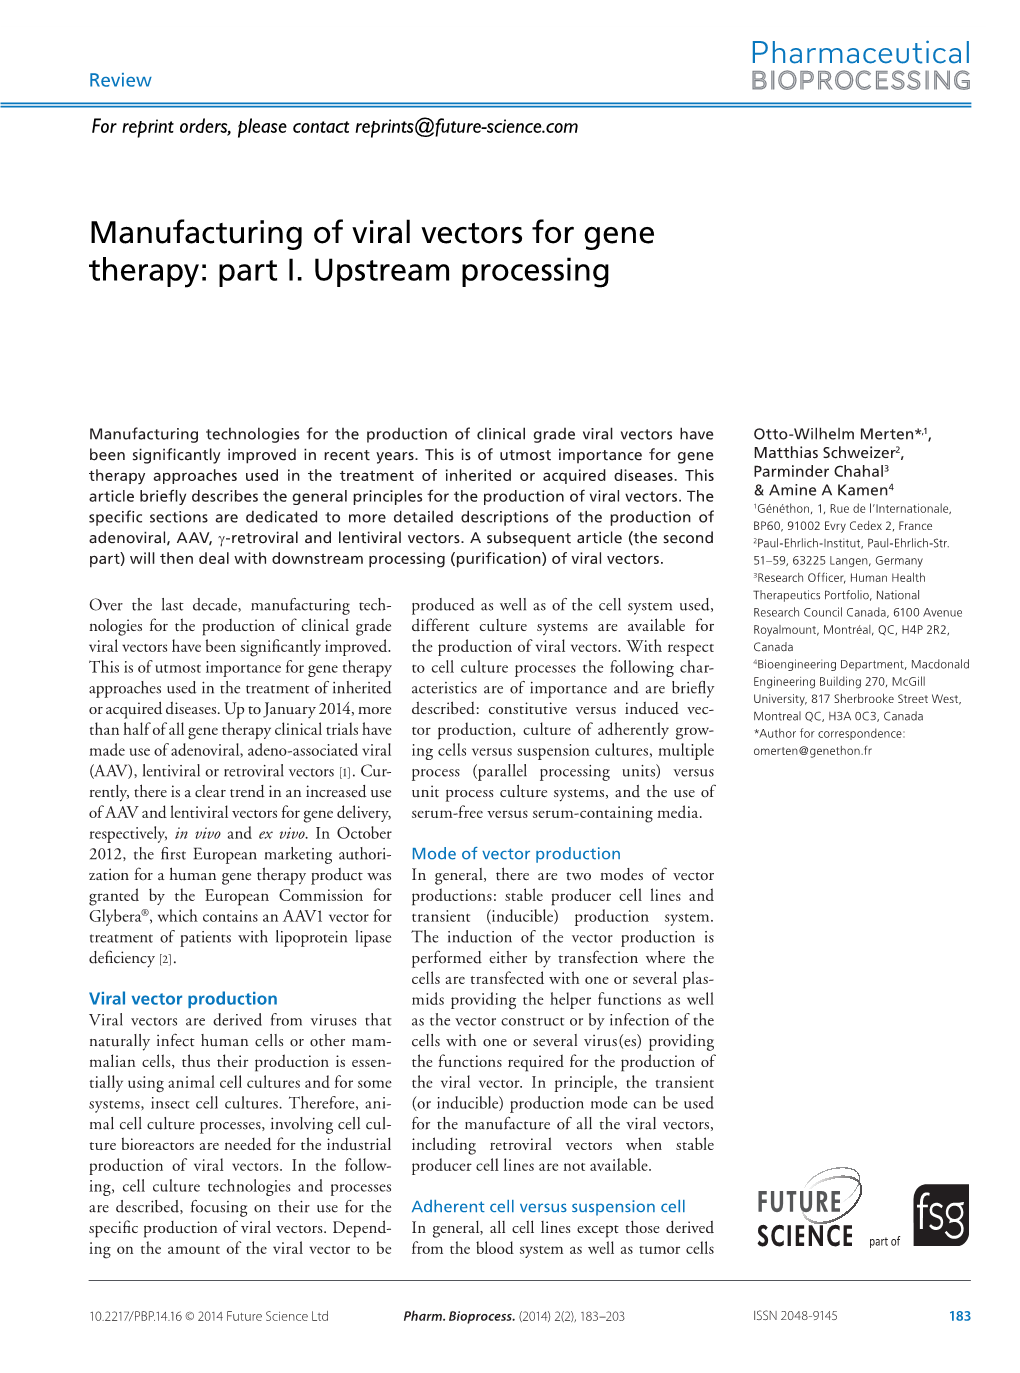 Manufacturing of Viral Vectors for Gene Therapy: Part I